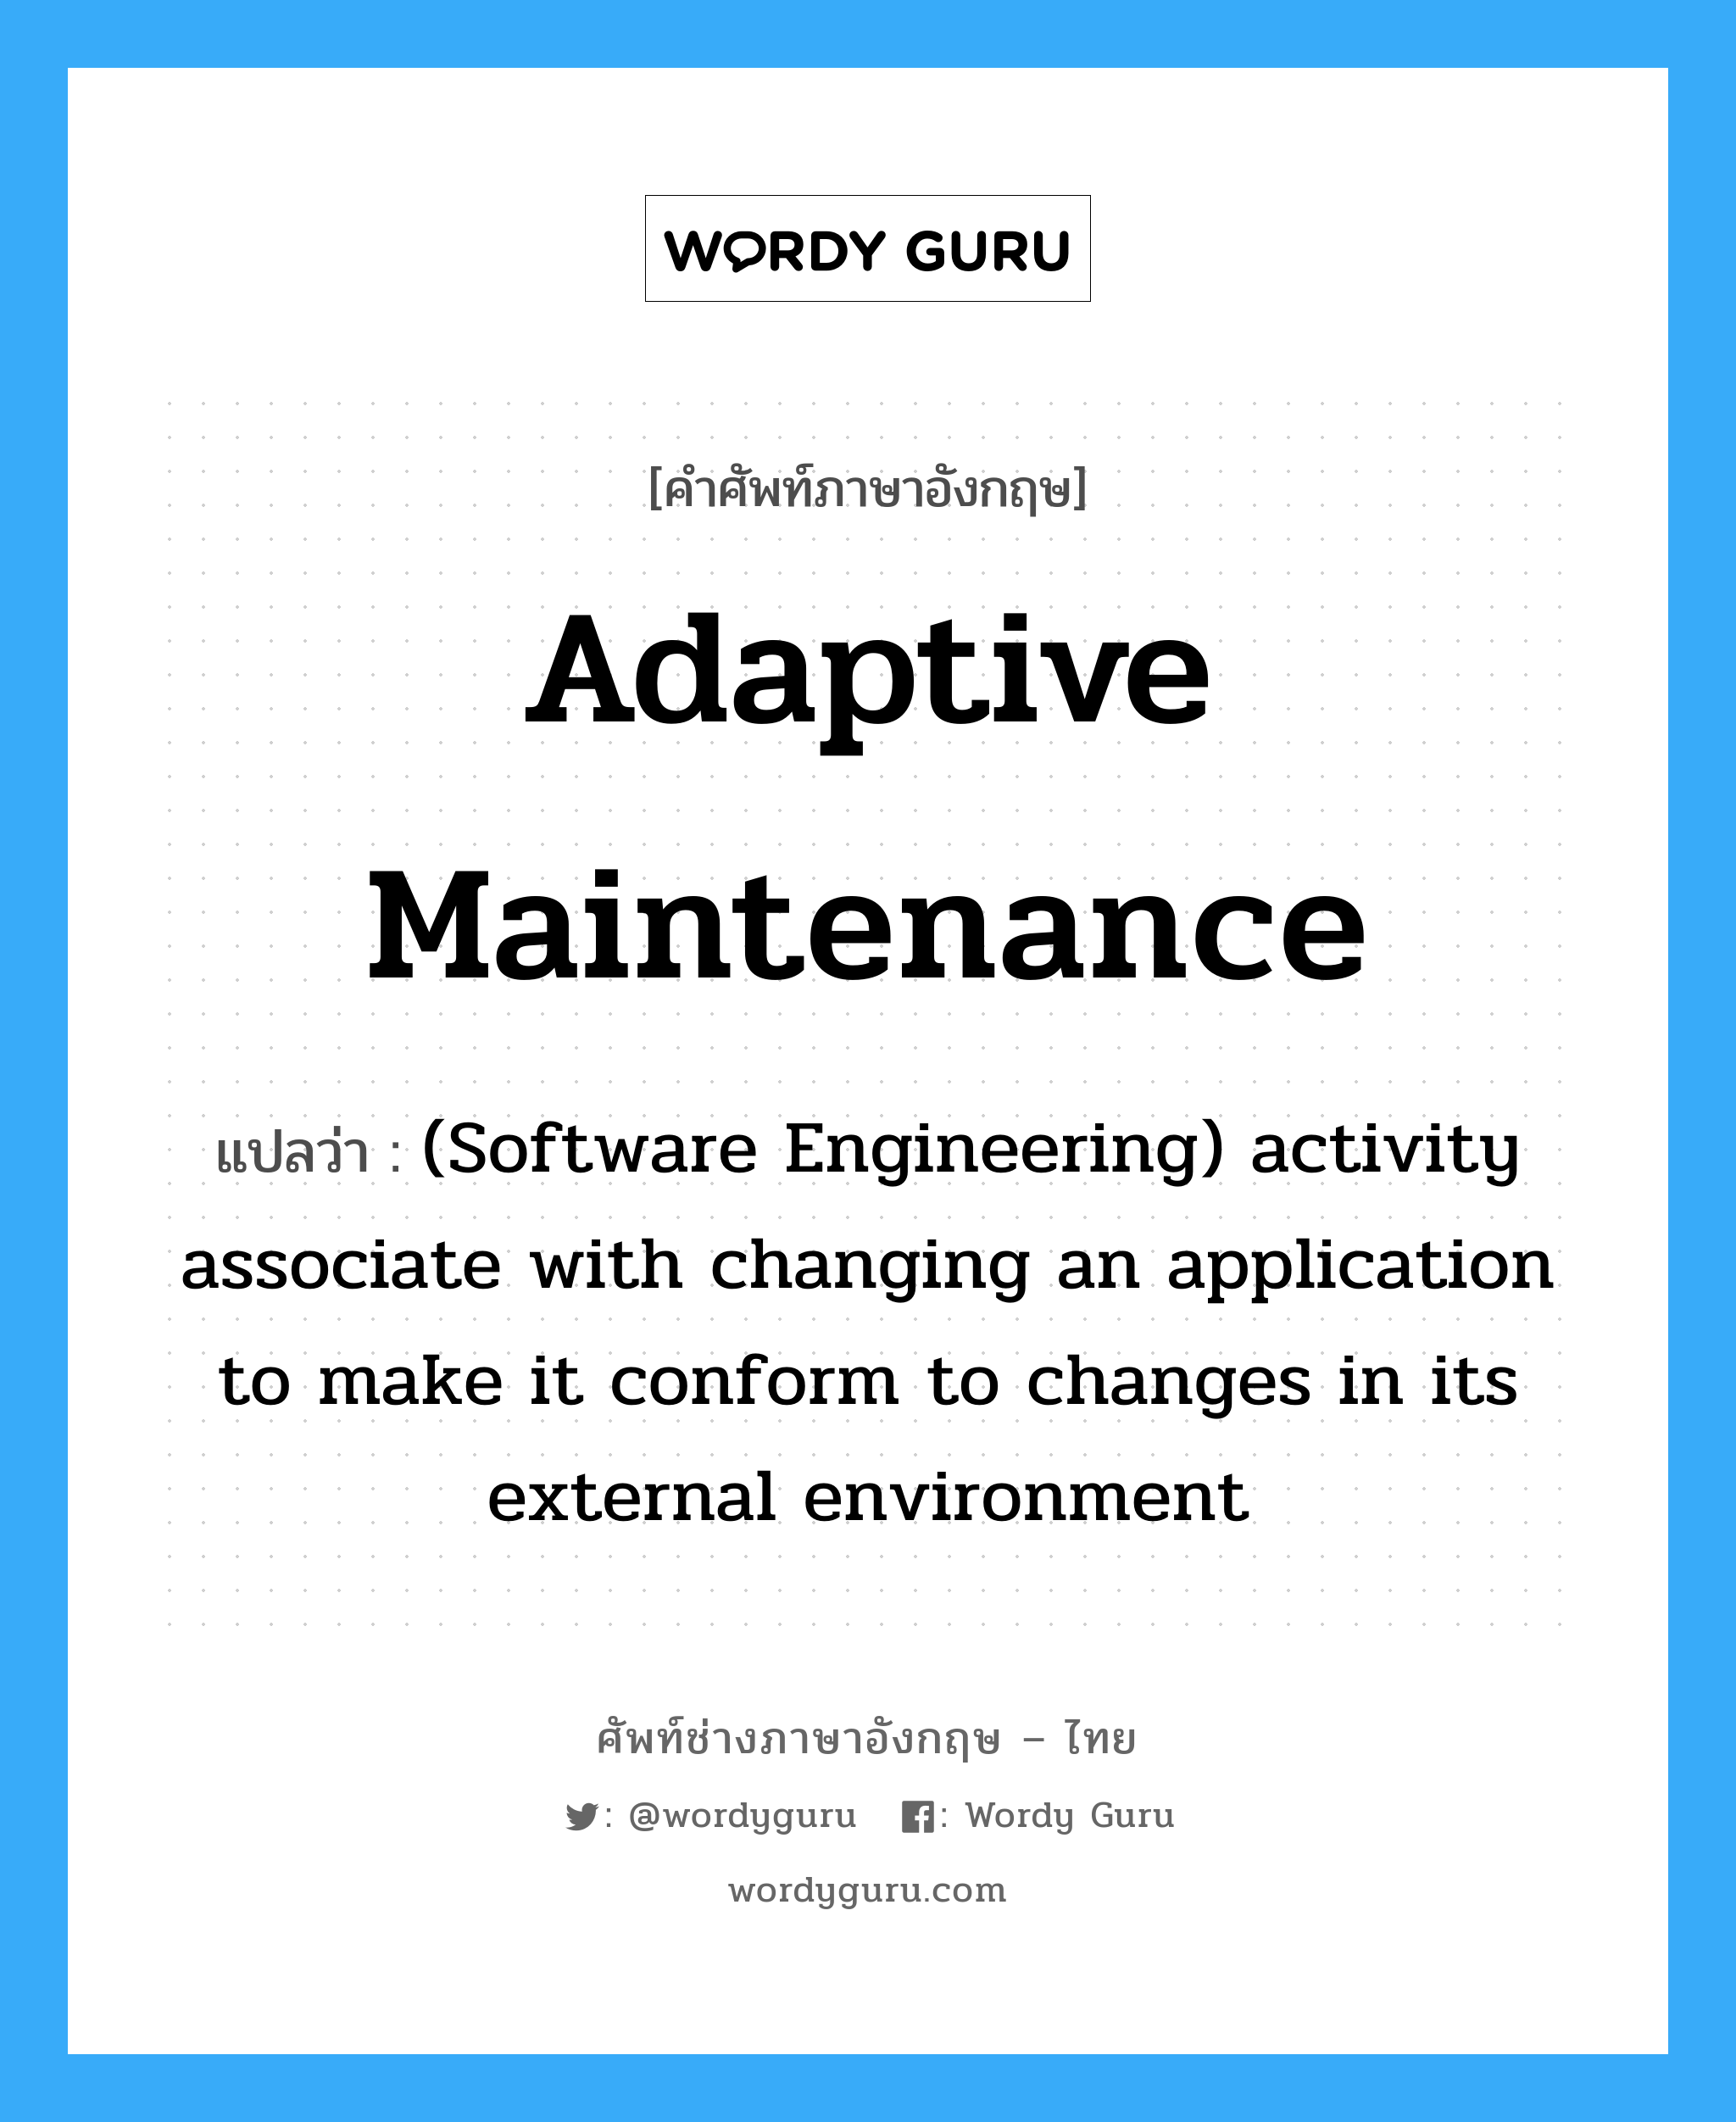 (Software Engineering) activity associate with changing an application to make it conform to changes in its external environment ภาษาอังกฤษ?, คำศัพท์ช่างภาษาอังกฤษ - ไทย (Software Engineering) activity associate with changing an application to make it conform to changes in its external environment คำศัพท์ภาษาอังกฤษ (Software Engineering) activity associate with changing an application to make it conform to changes in its external environment แปลว่า Adaptive maintenance